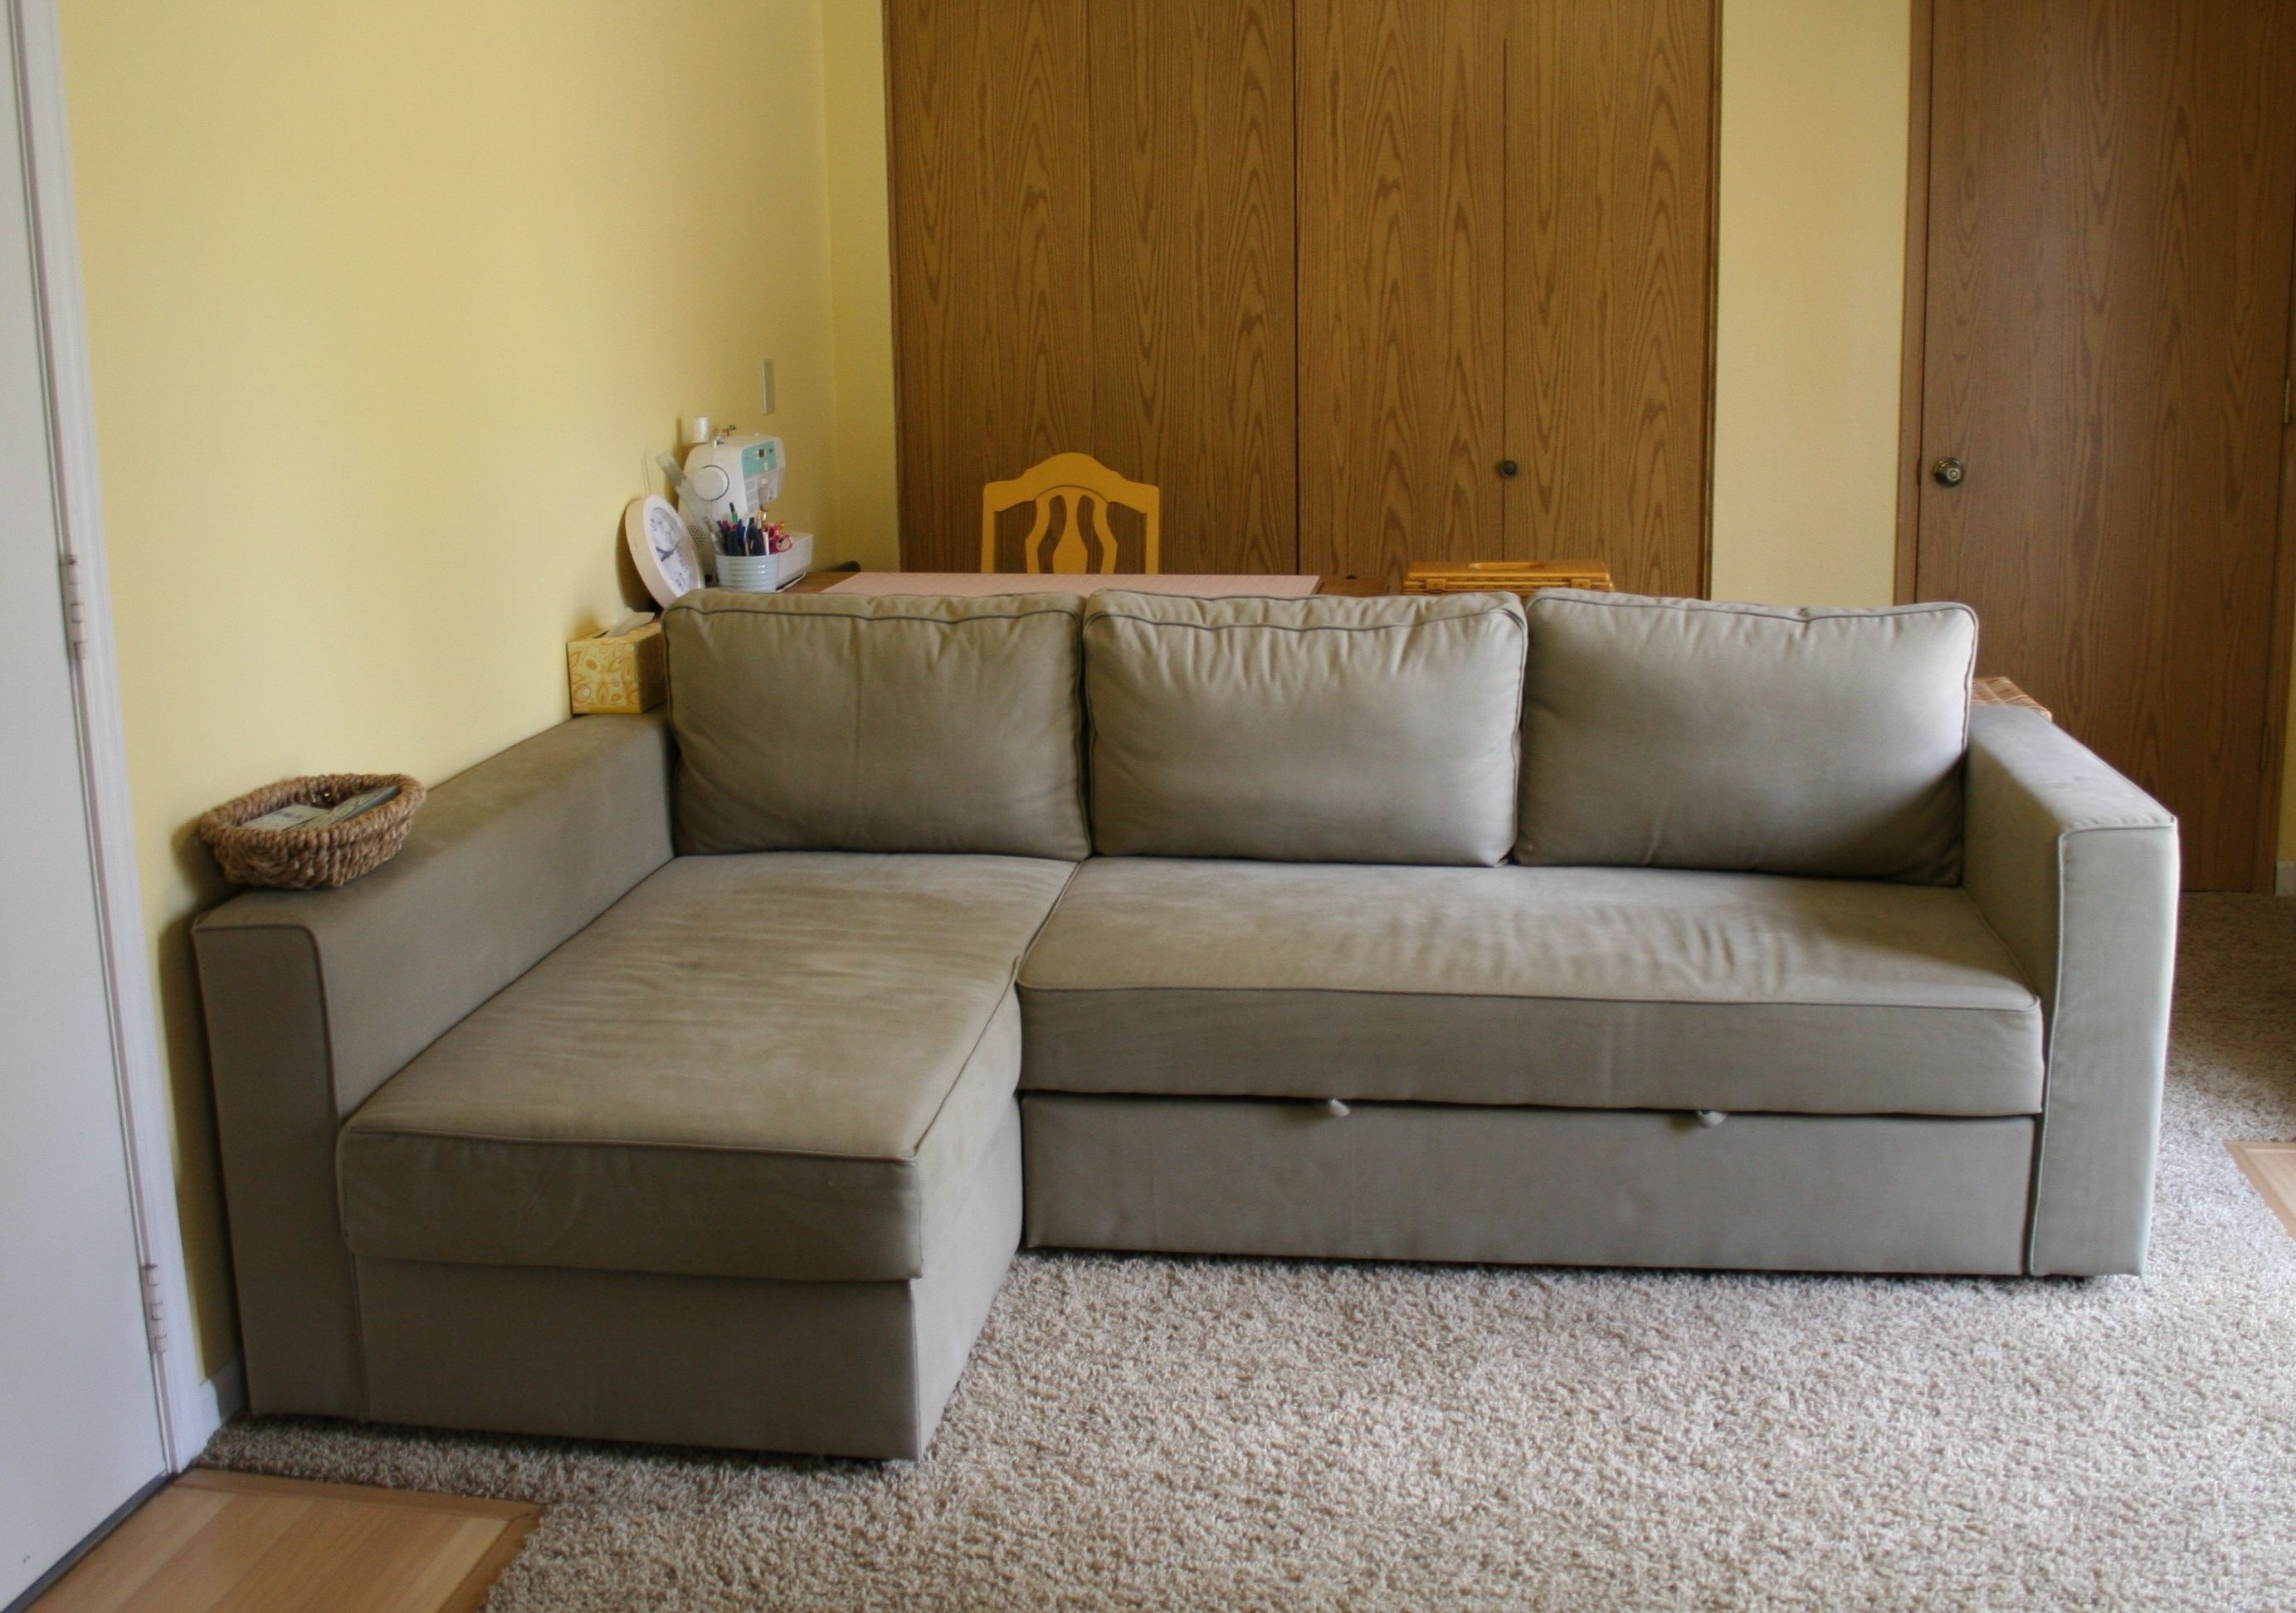 Preferred Manstad Sofas Within Manstad Sofa Bed With Storage From Ikea – Radkahair (View 1 of 15)